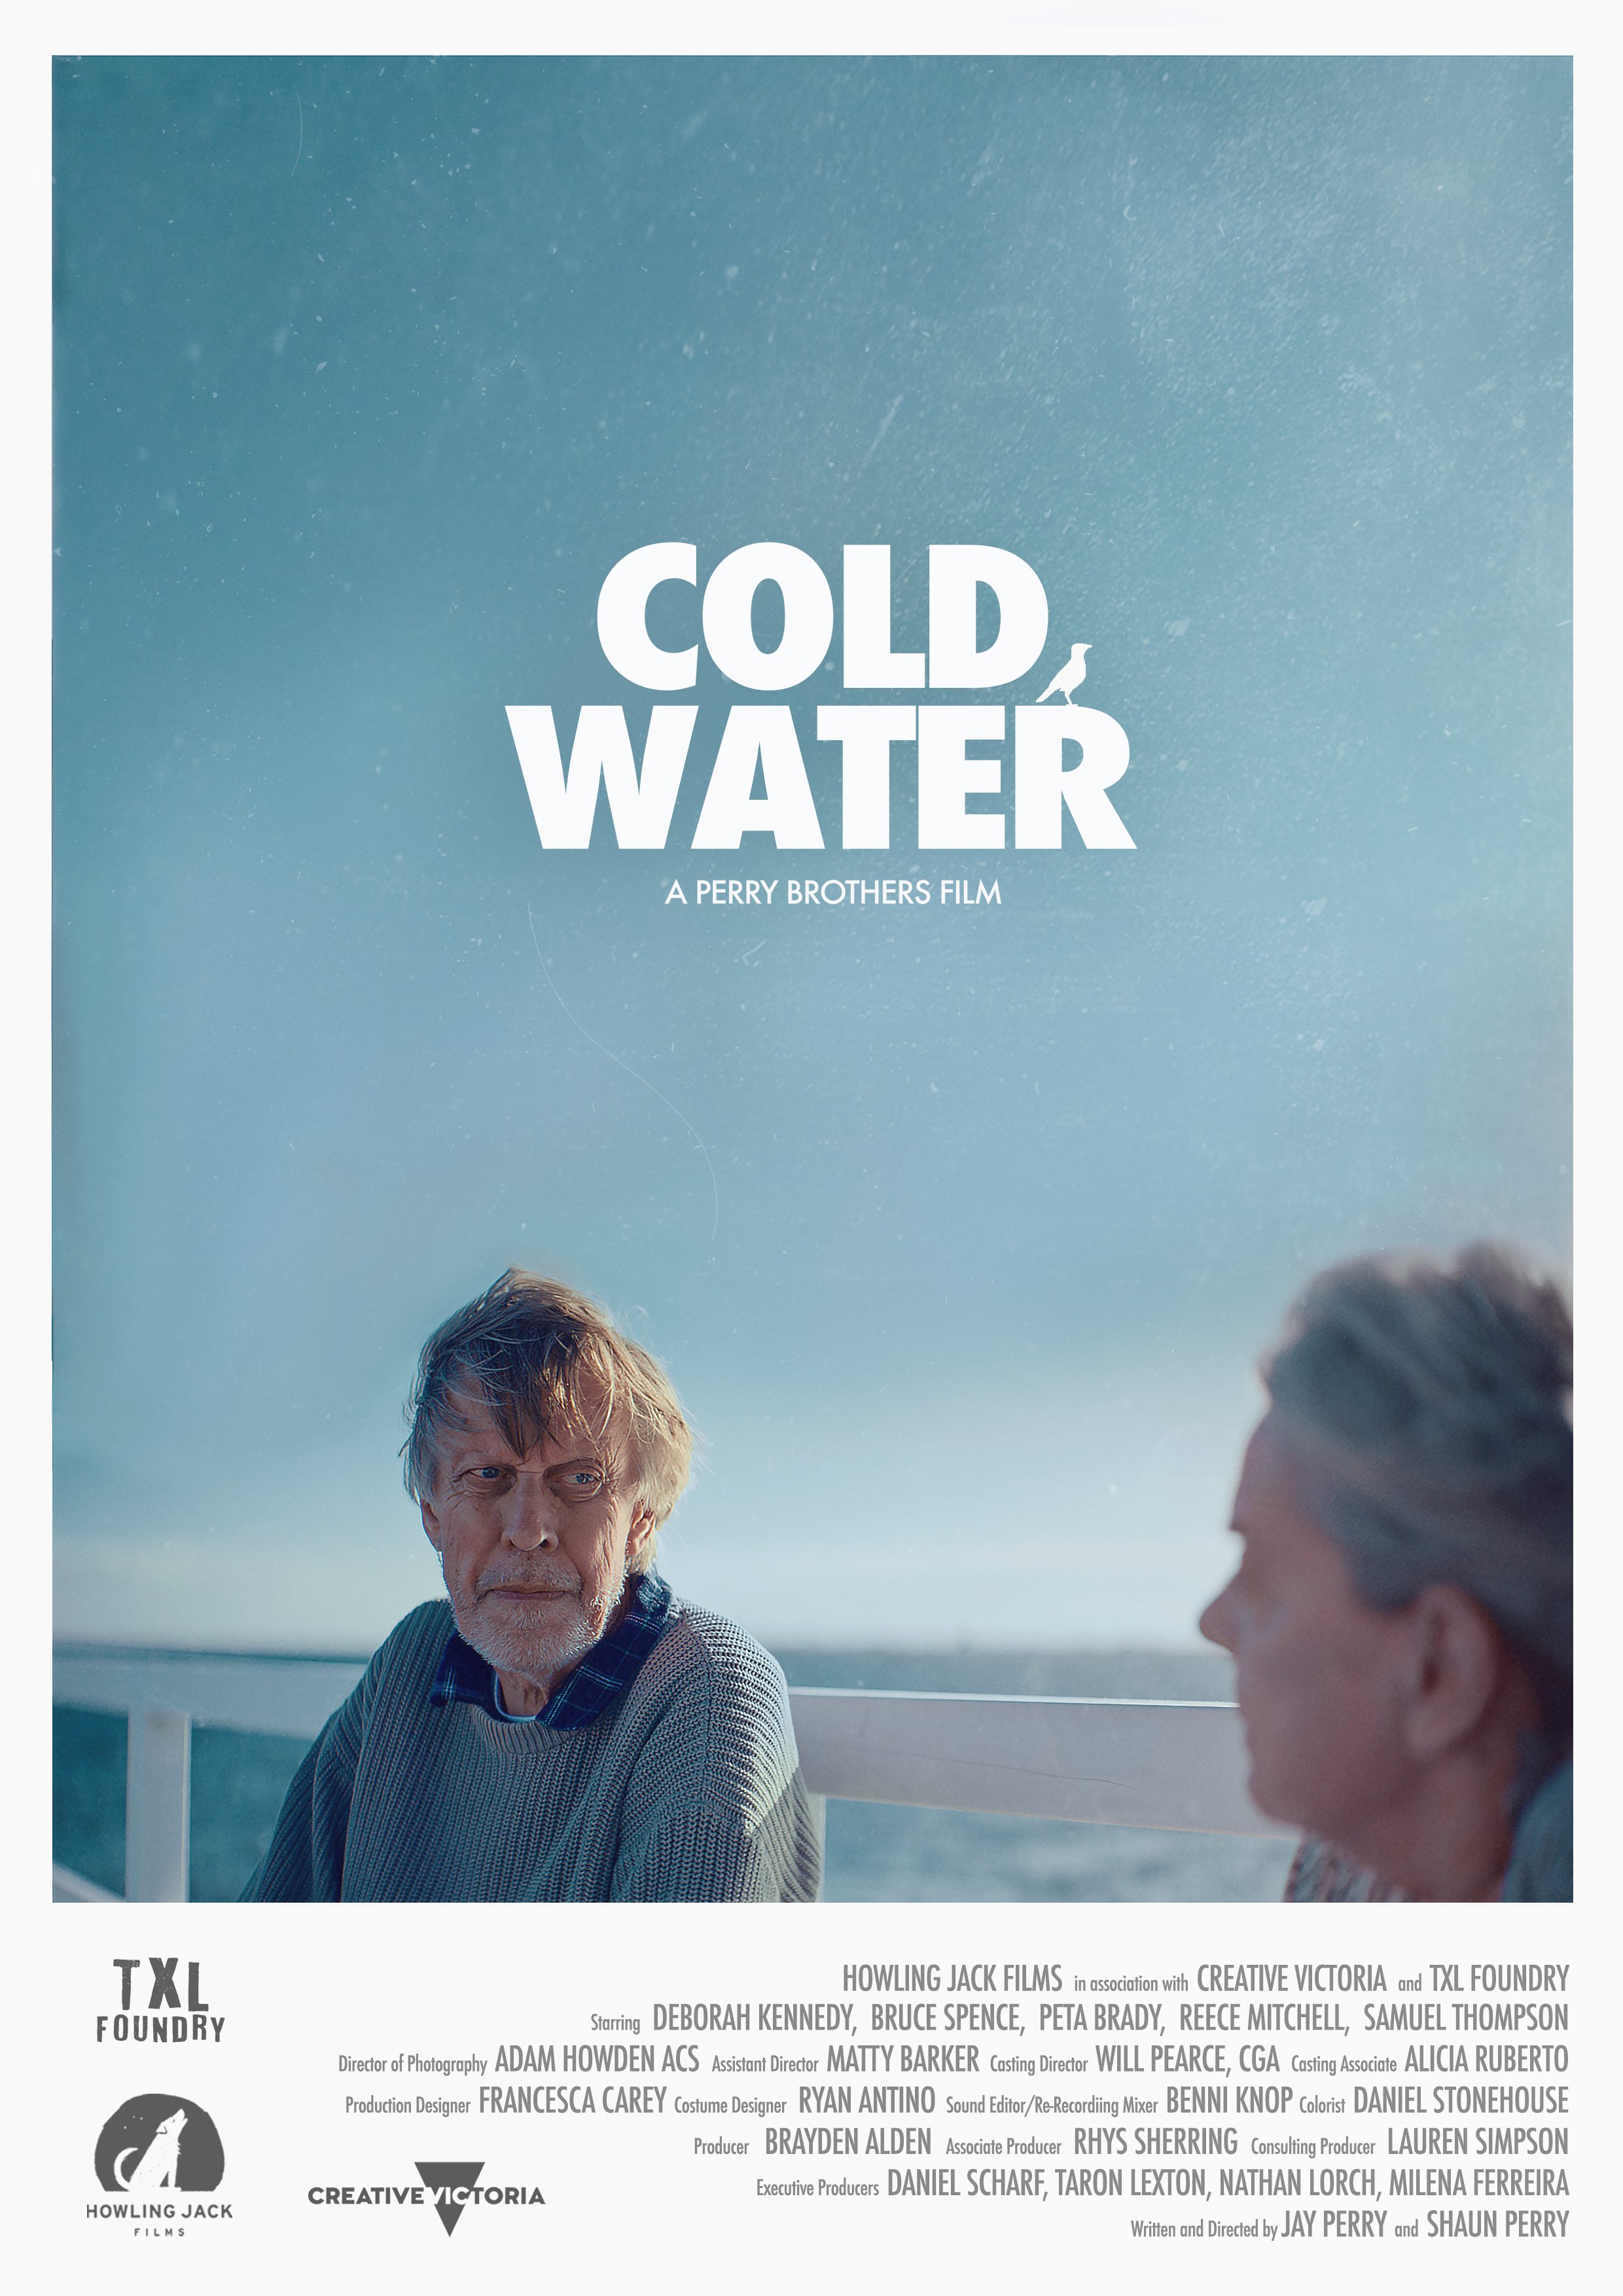 COLD WATER